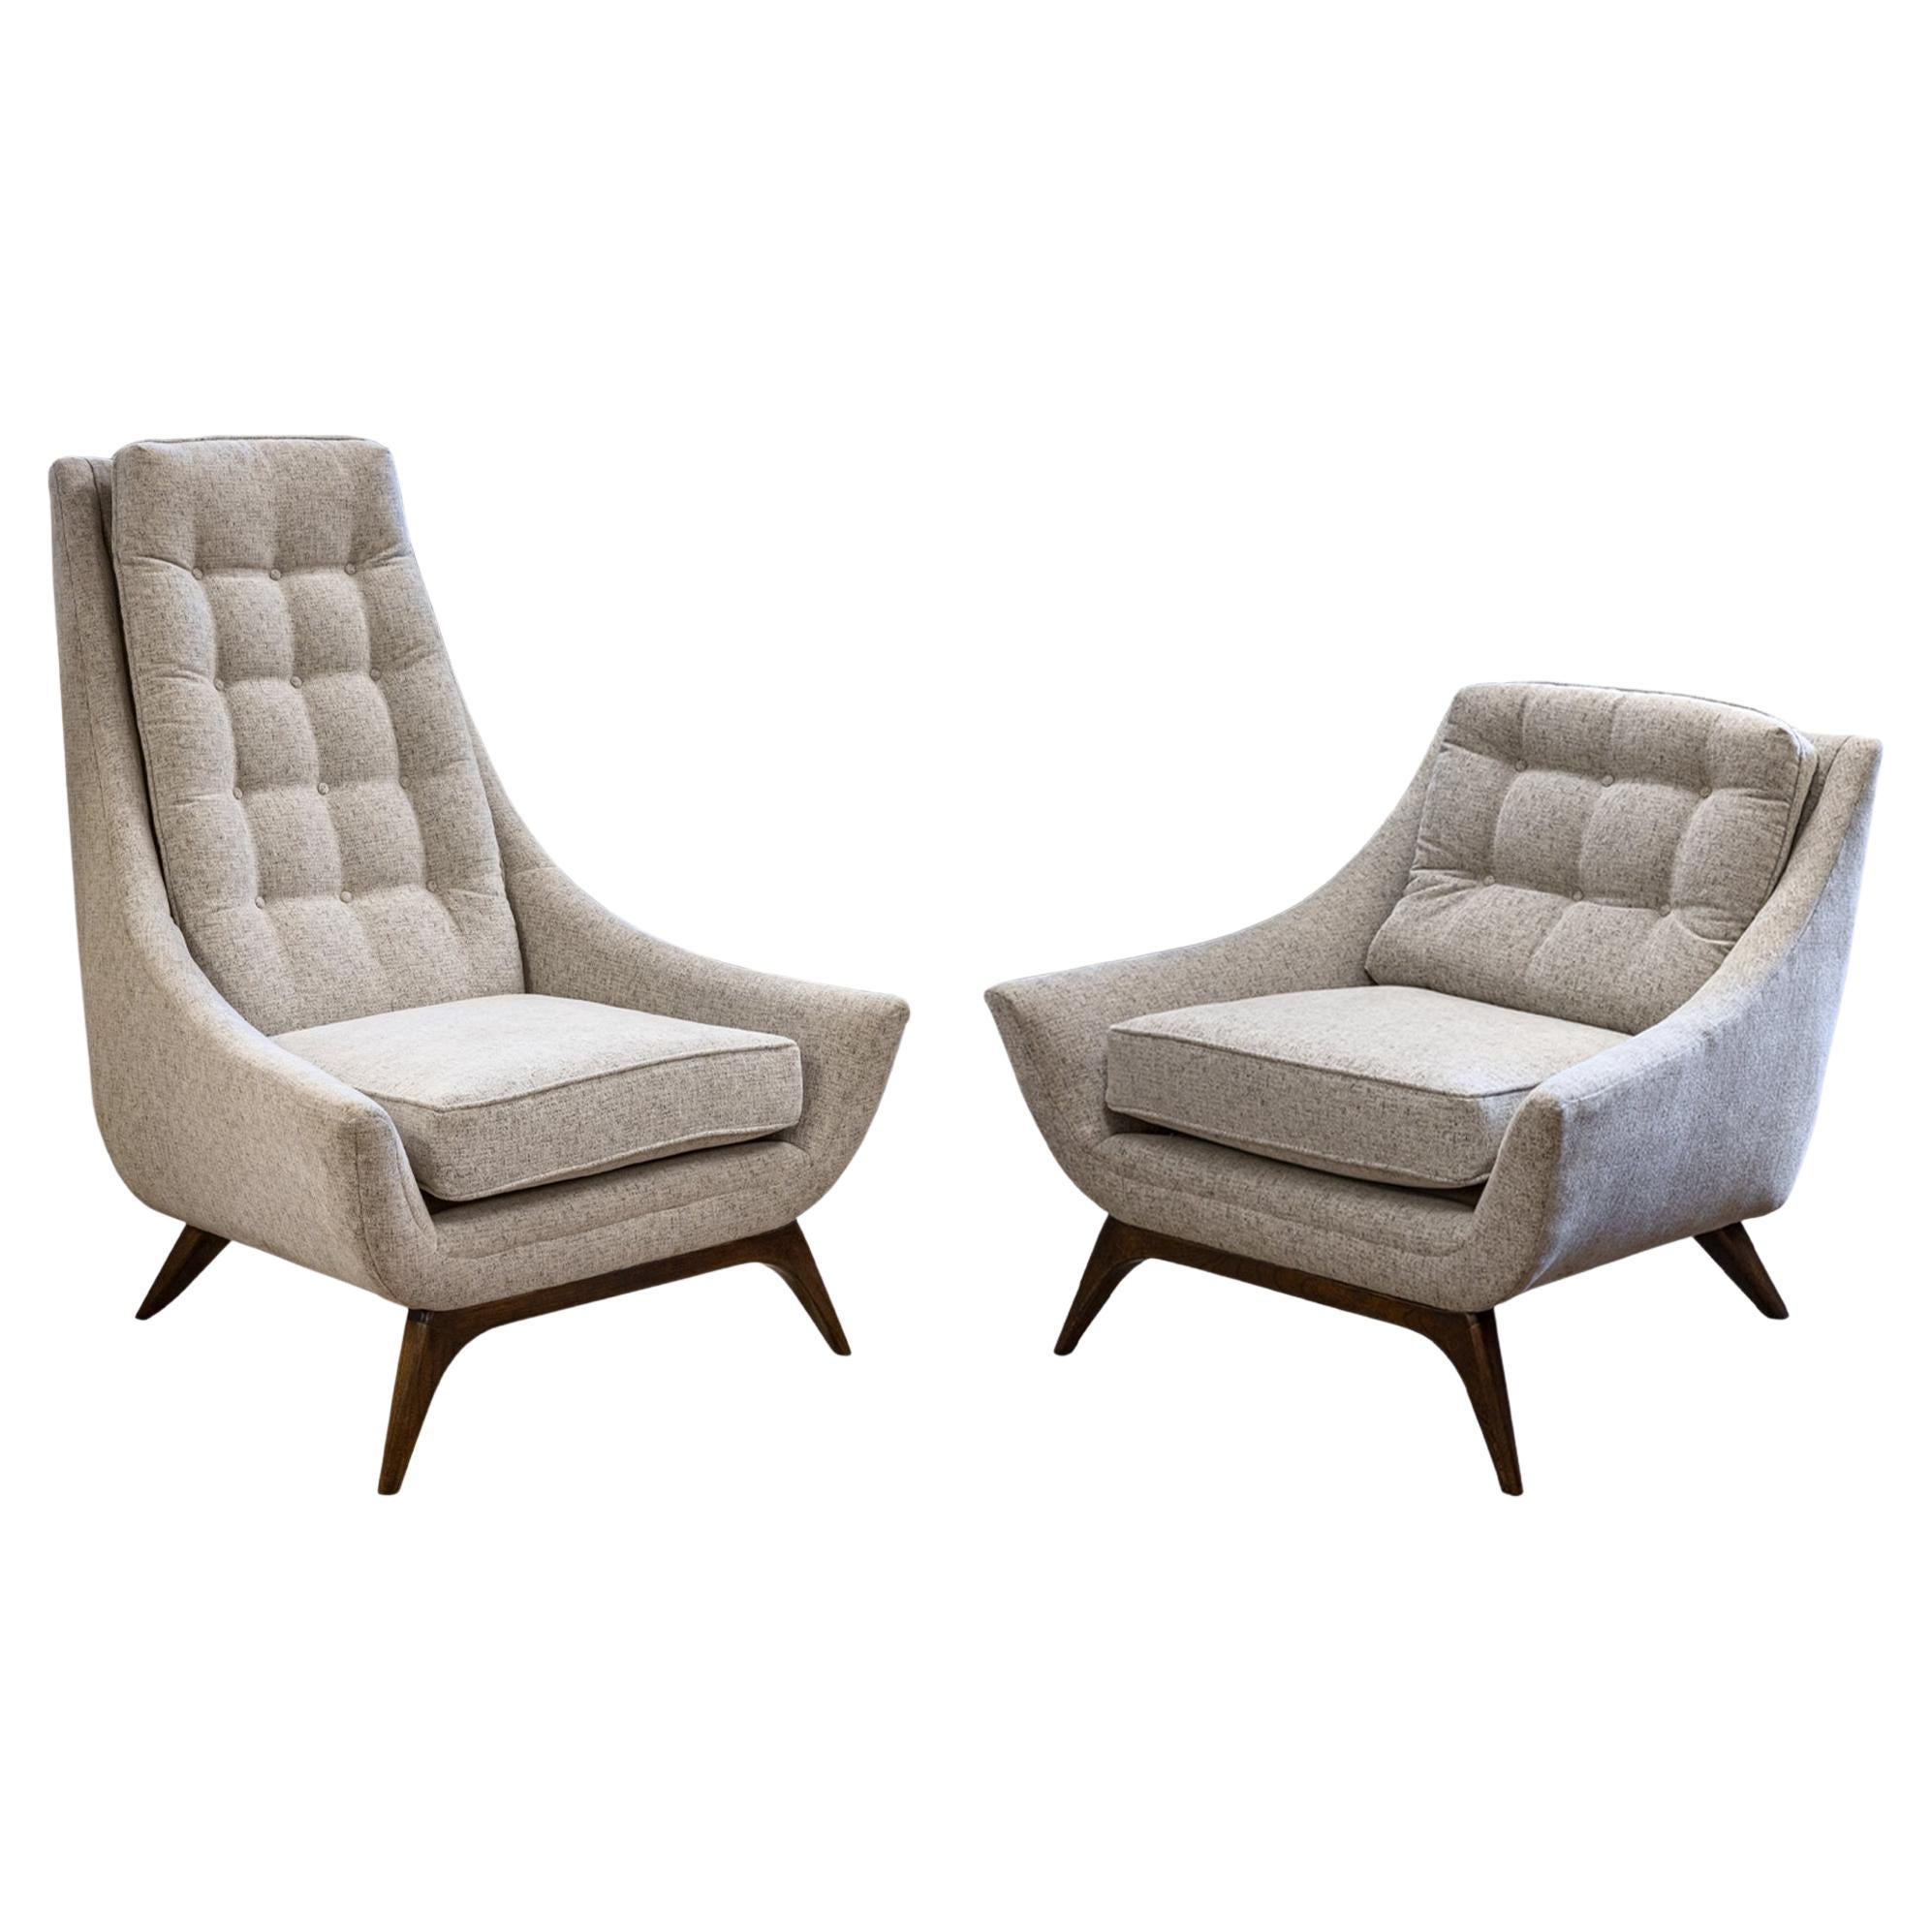 His and Hers Pair of Adrian Pearsall Style Reupholstered Armchair Accent Chairs For Sale